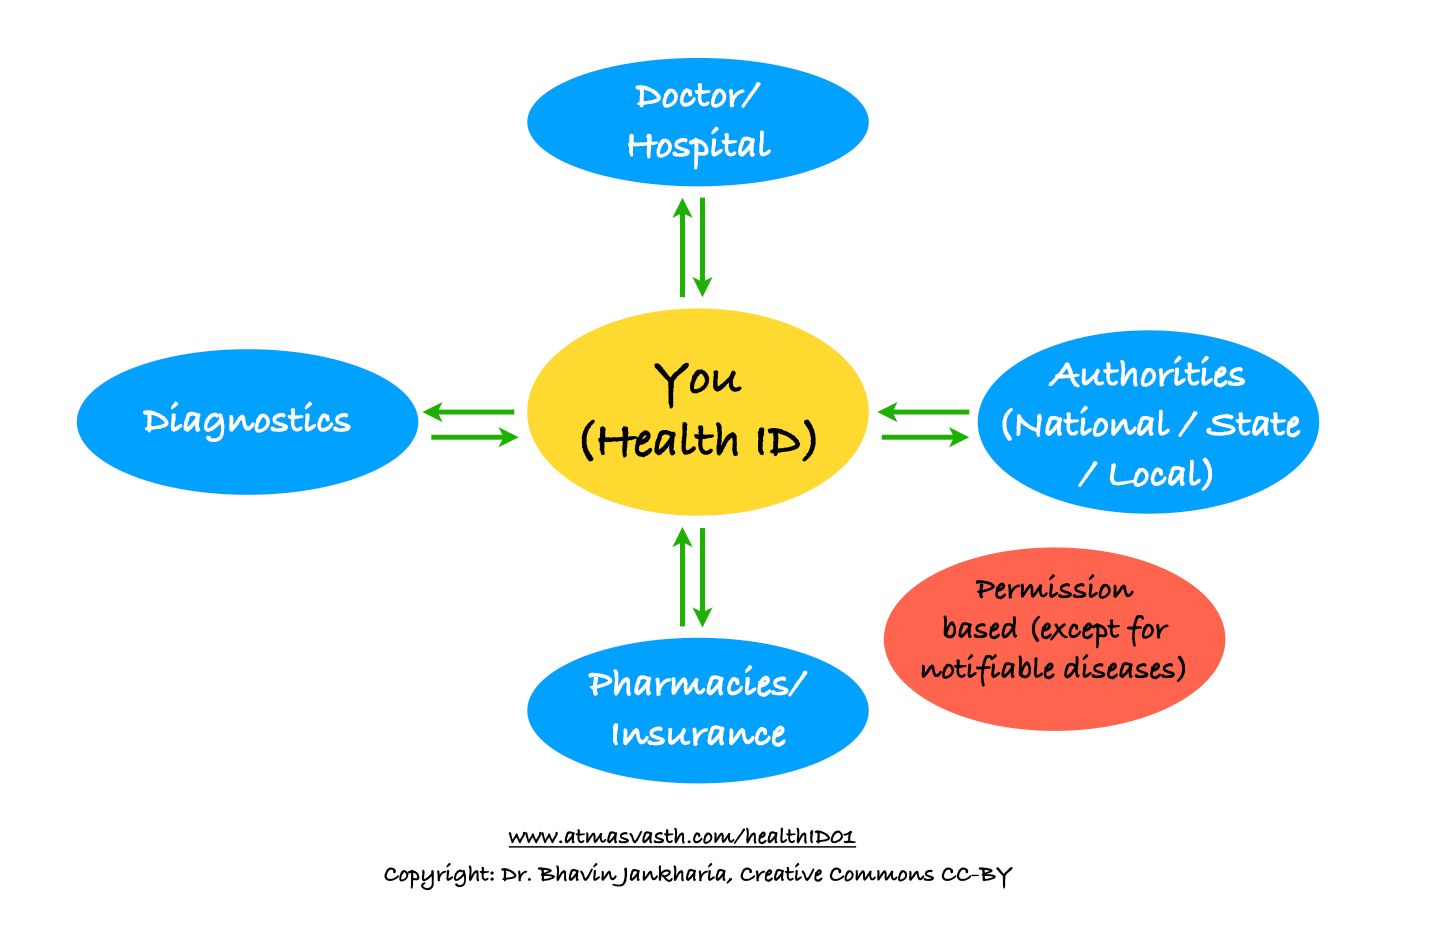 Your Health ID